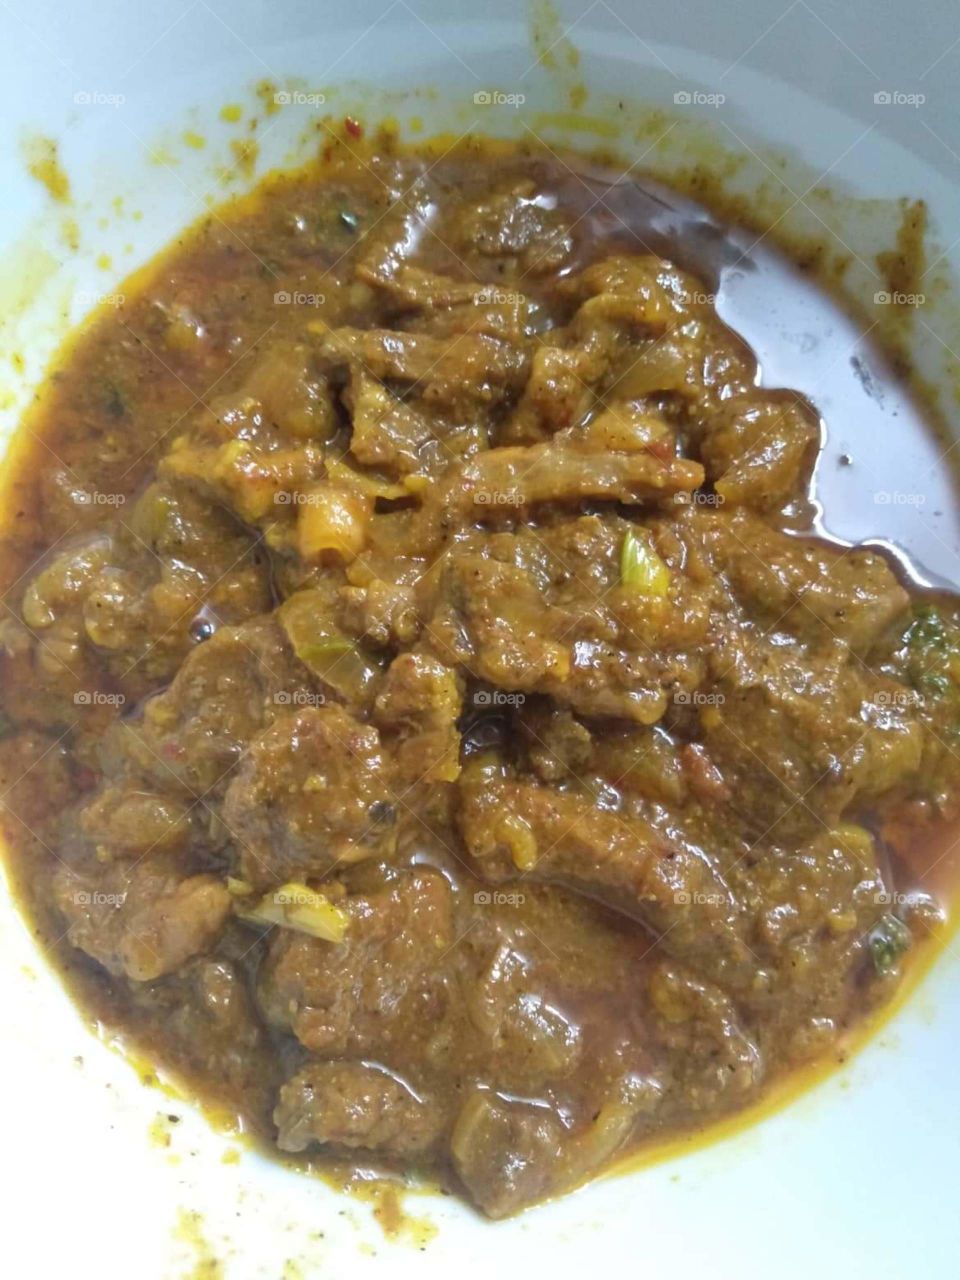 Beef and moutton masala from Vientiane Lao PDR
.